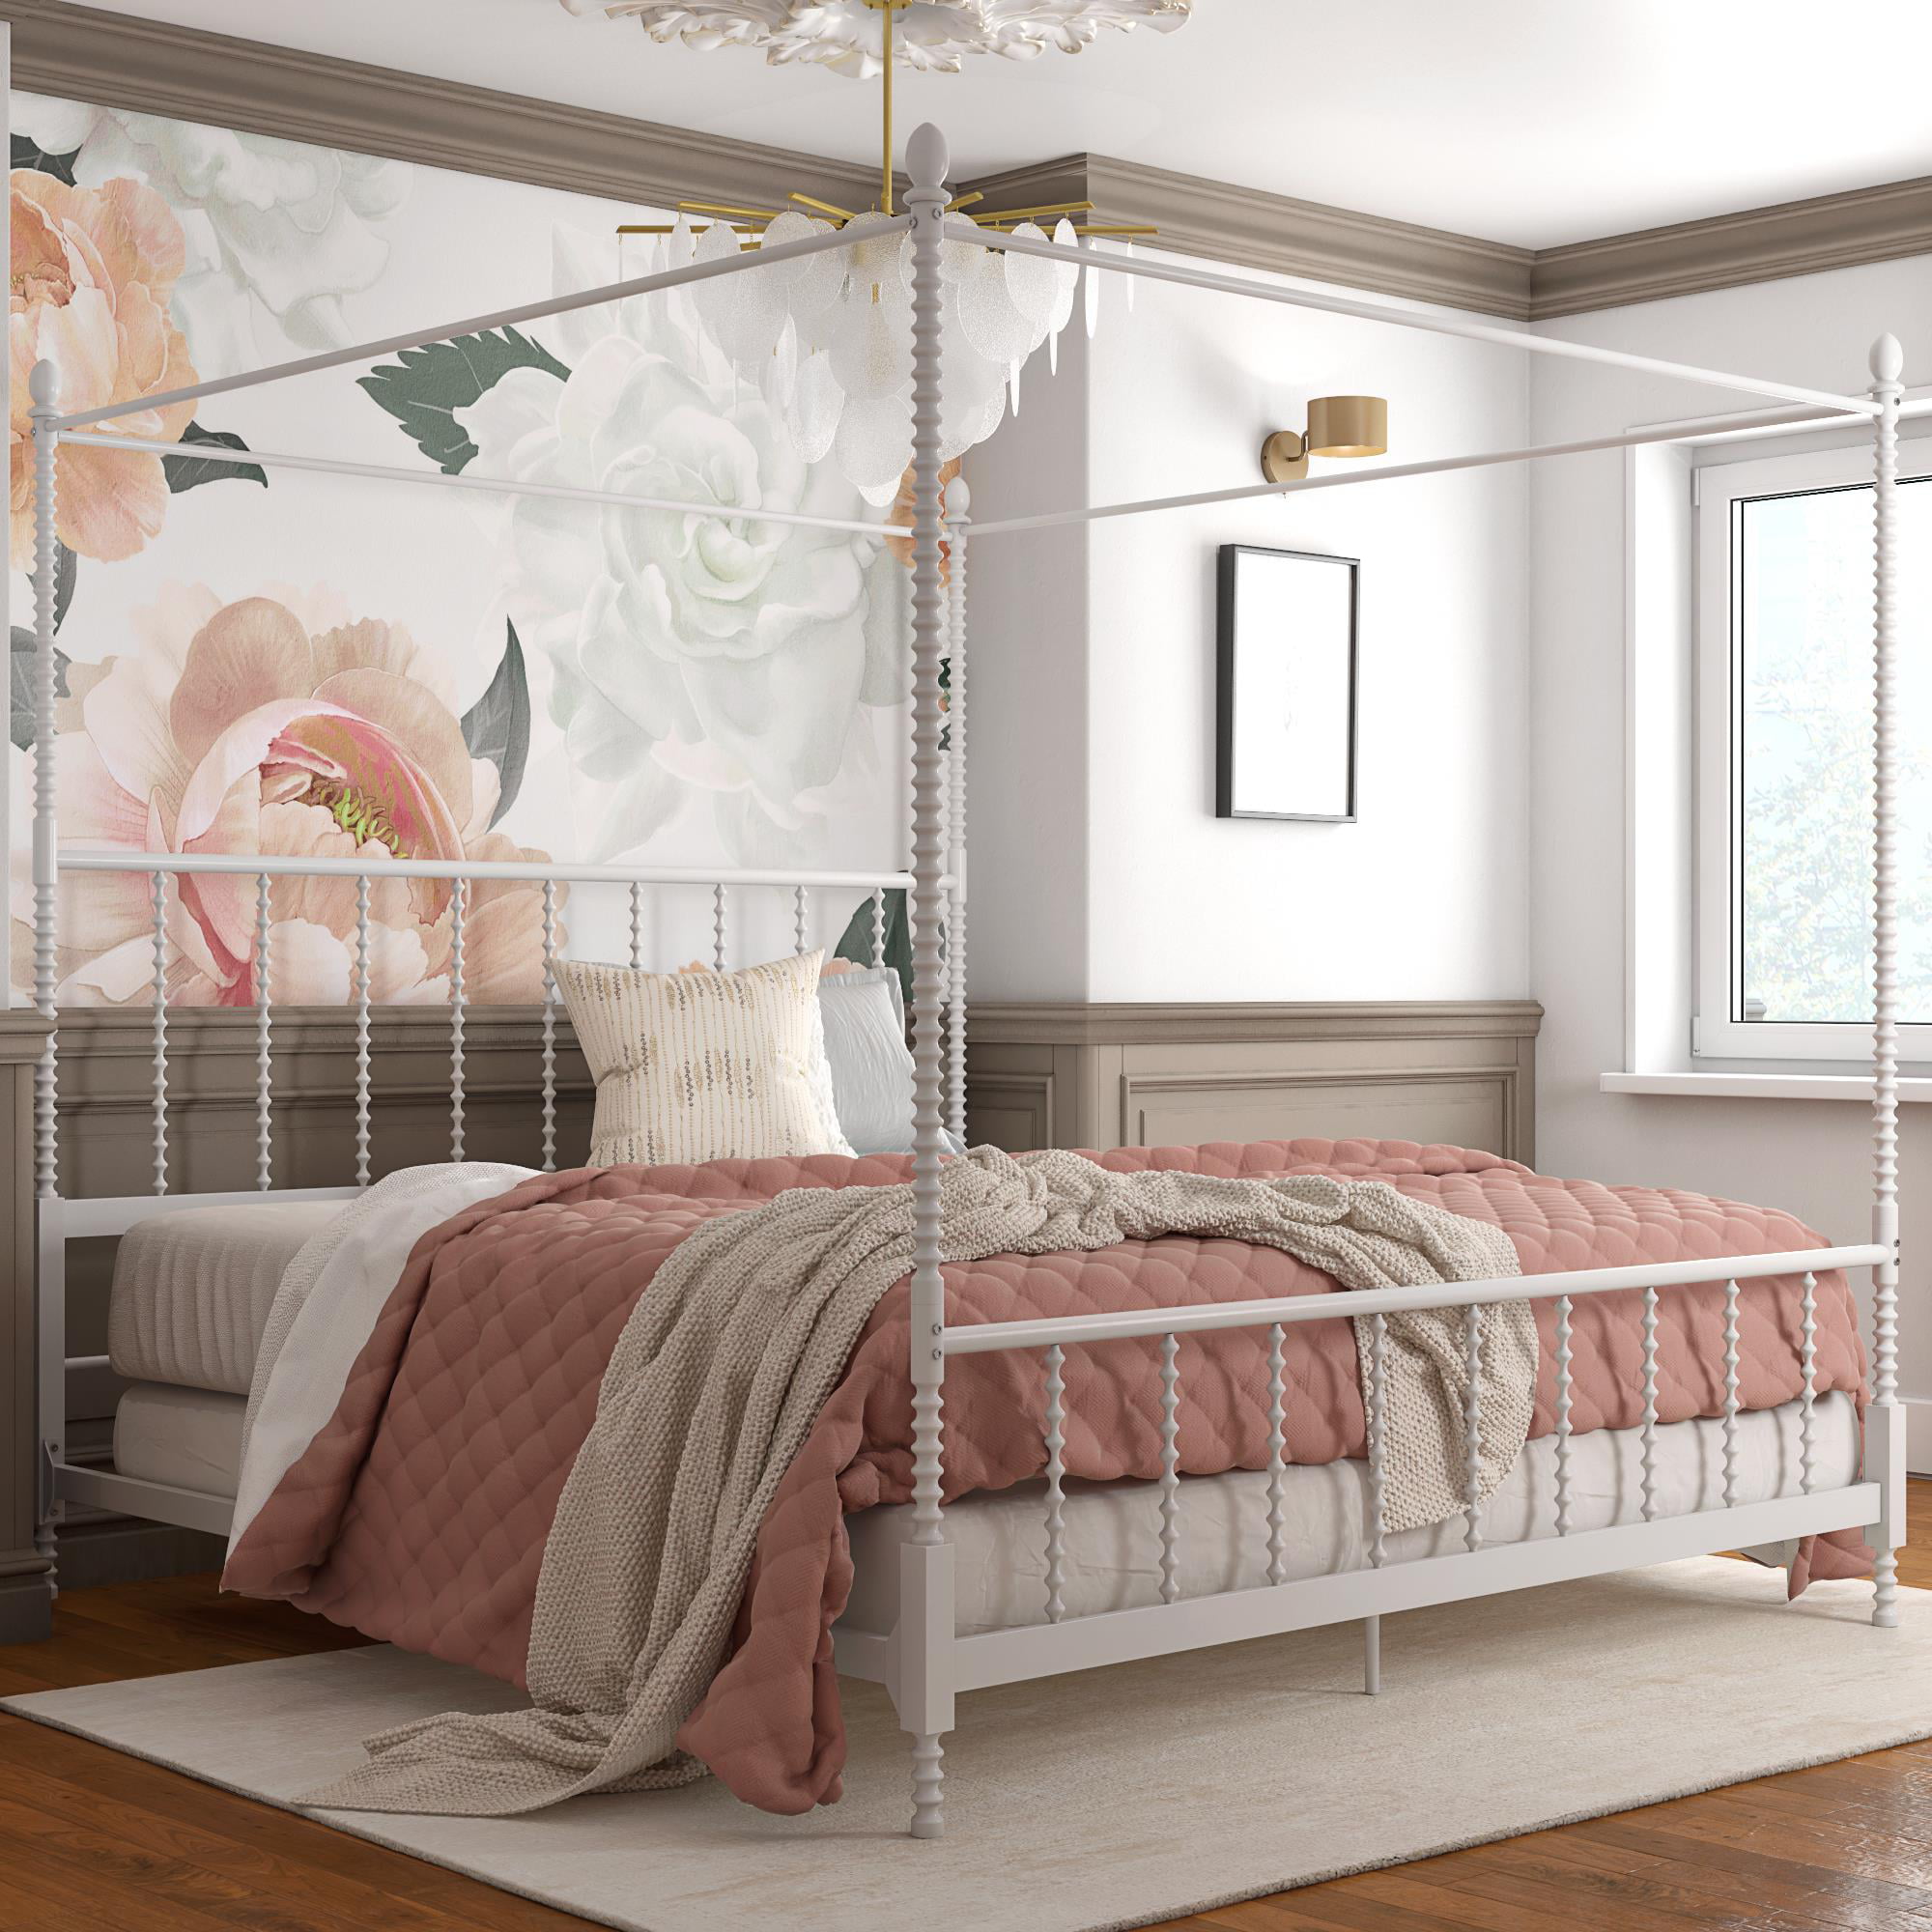 DHP Anika Metal Canopy Bed, King Size Frame, Bedroom Furniture, White